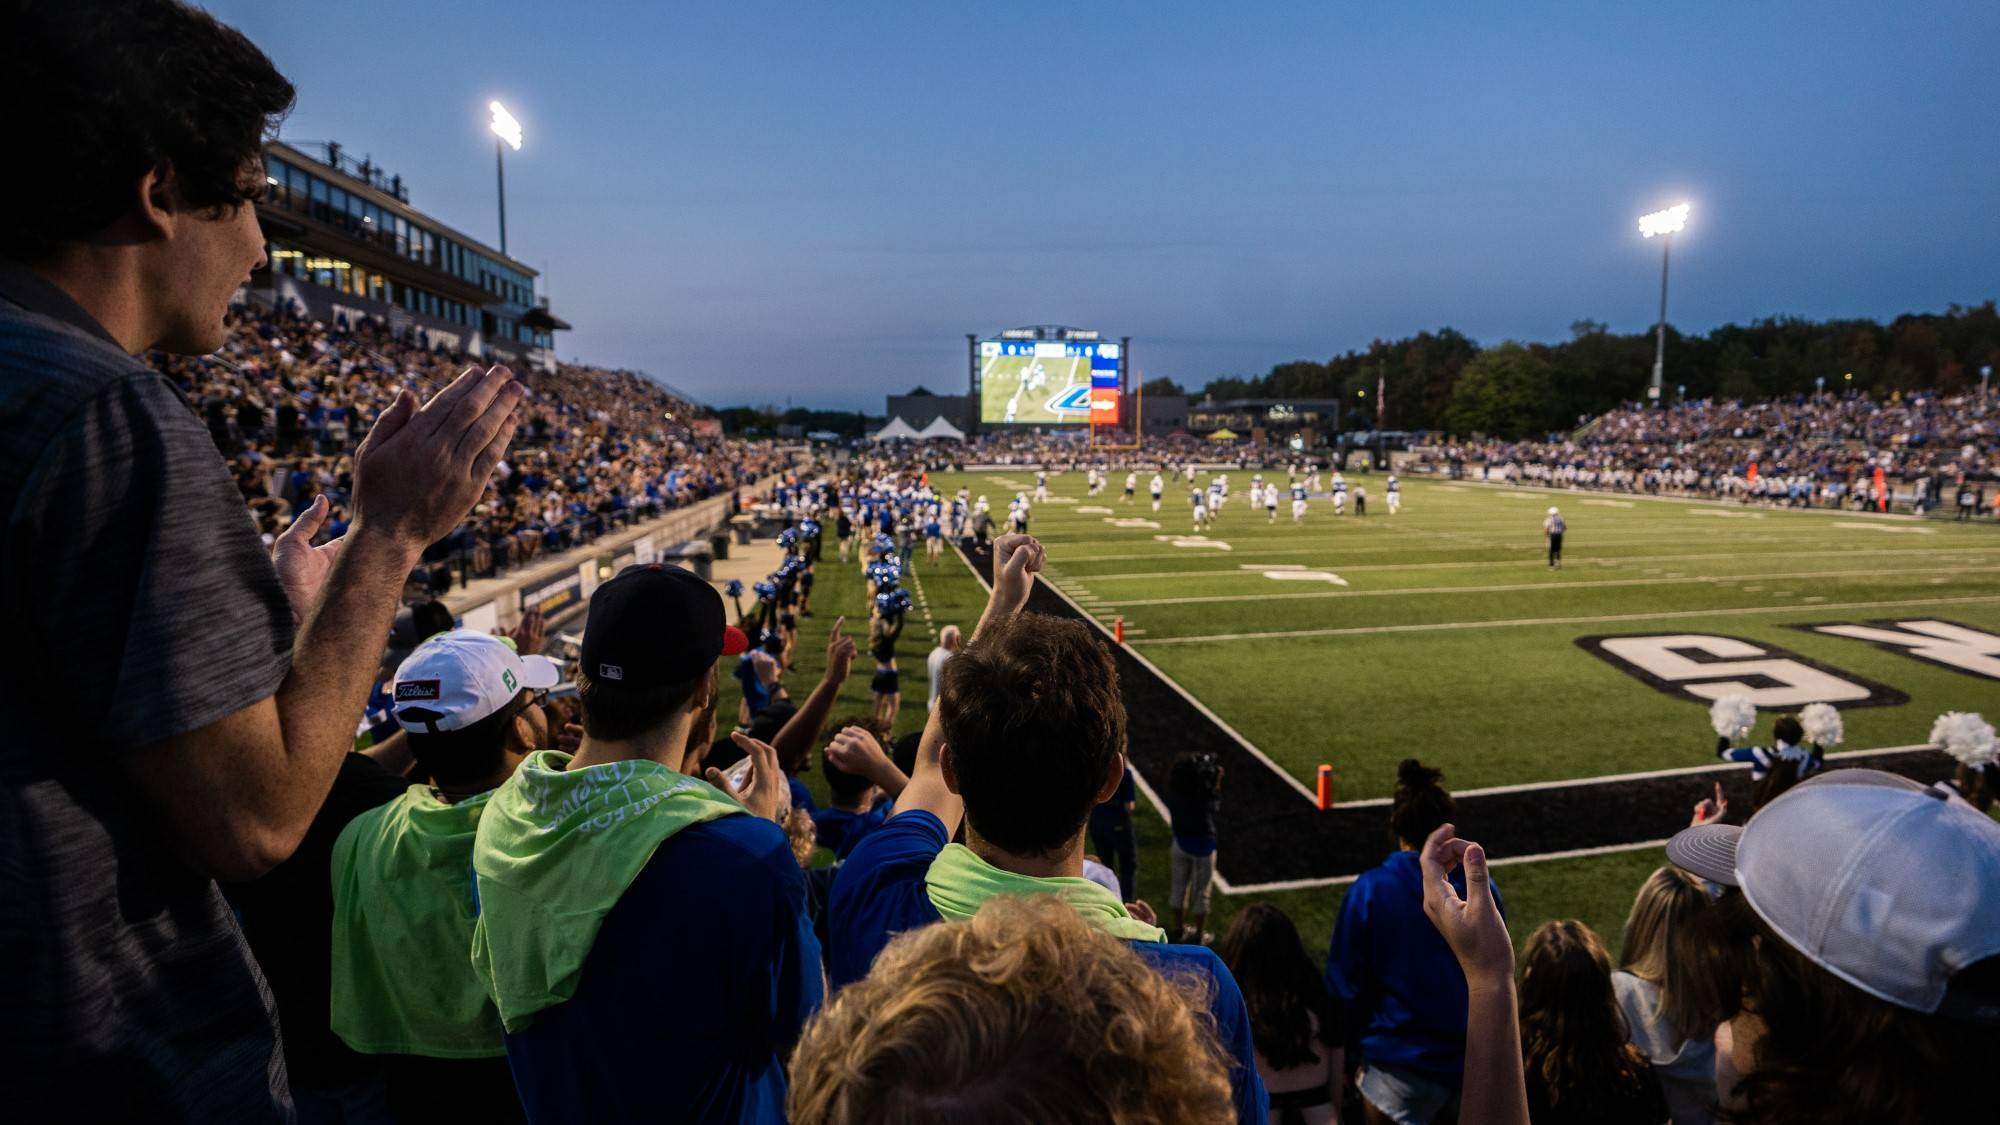 Students cheer on the Lakers at Lubbers Stadium